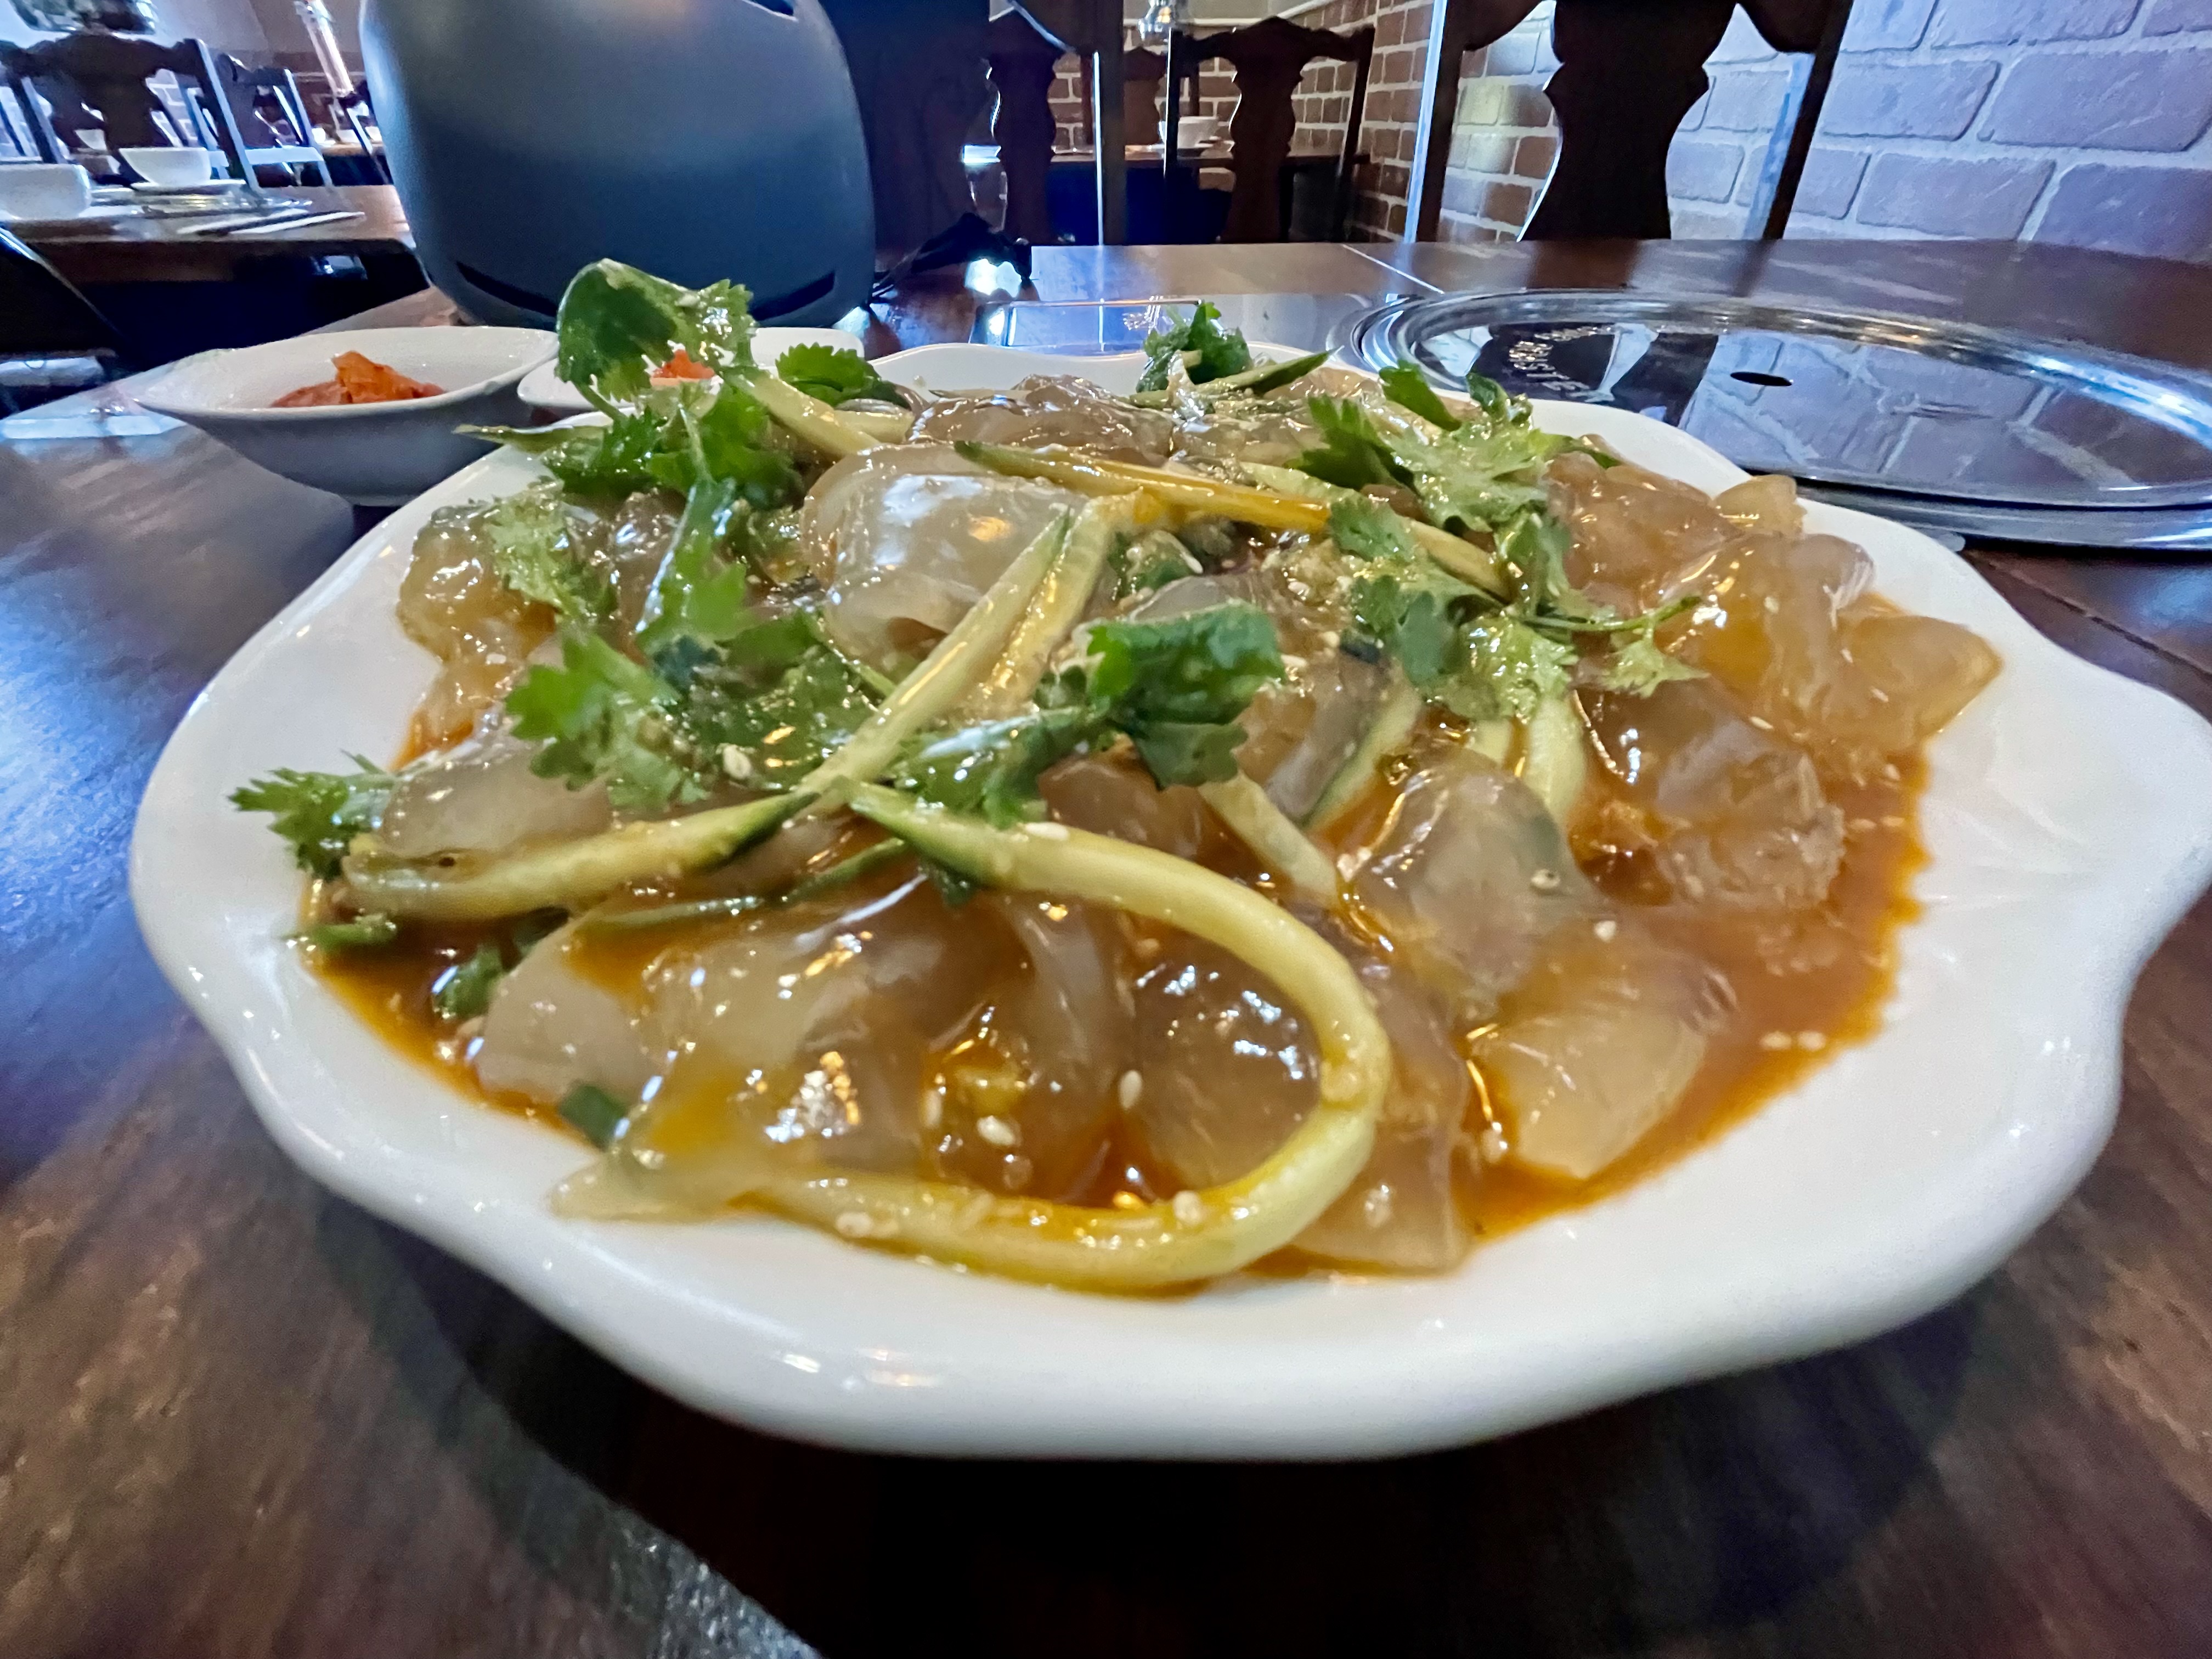 As the noodles constitute much more starch given its made from potatoes, the texture is more akin to tapioca than the noodles you may have had in, say, ramen